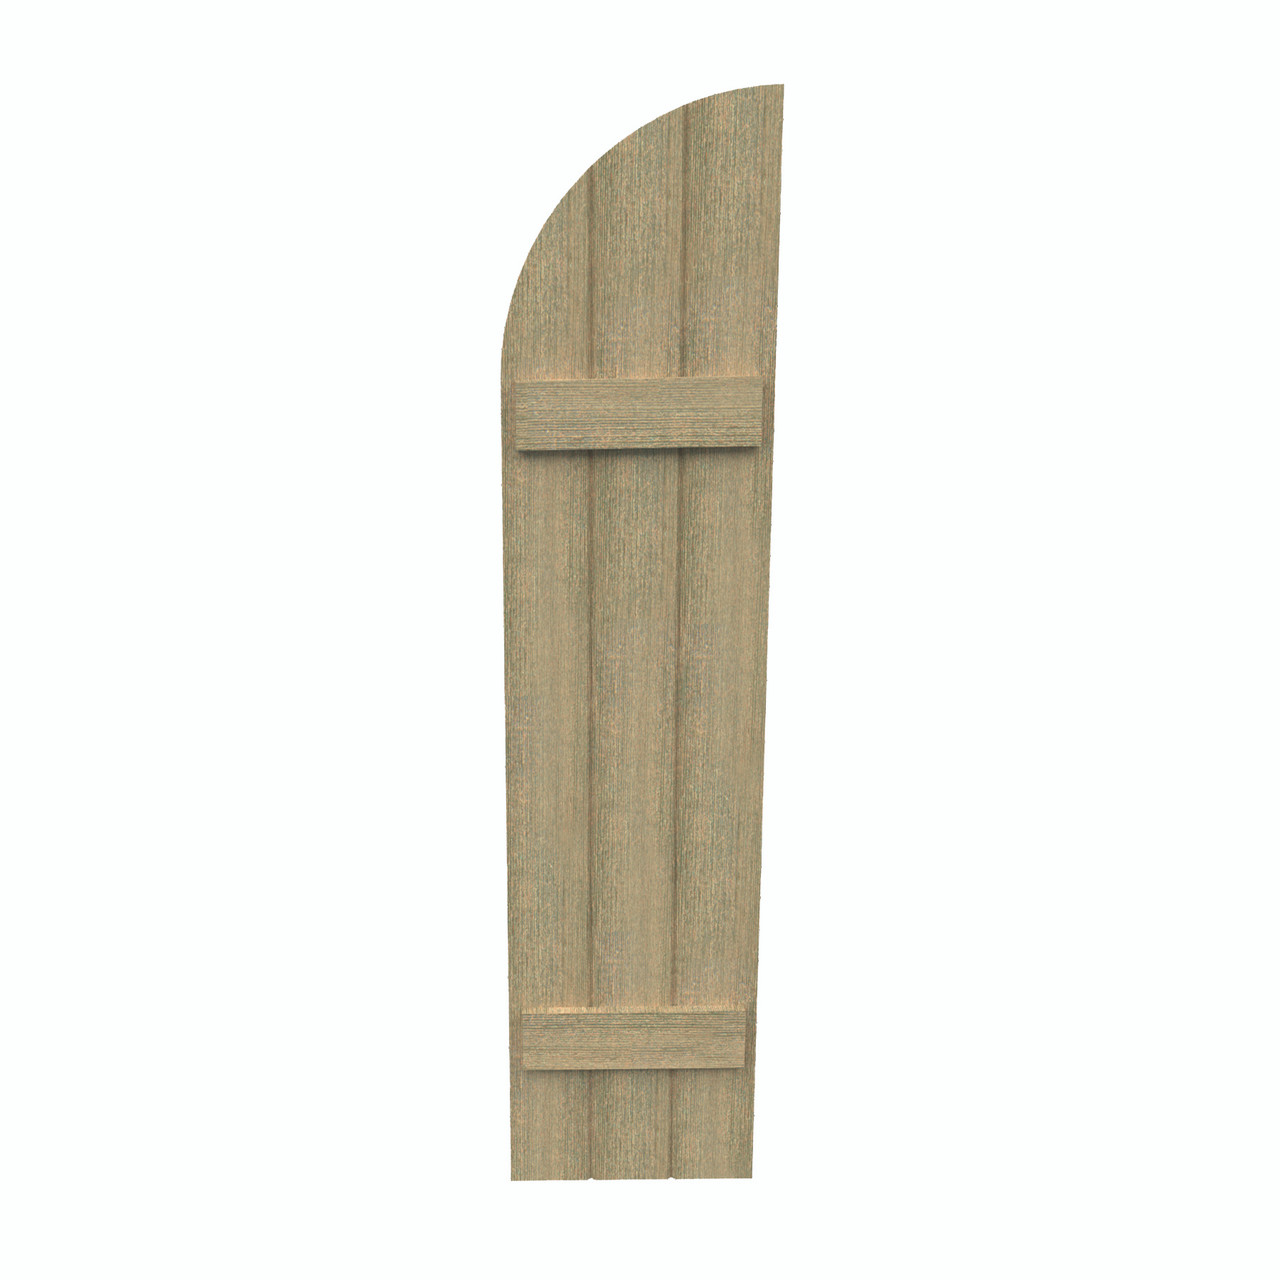 18 inch by 56 inch Quarter Round Shutter with 3-Boards